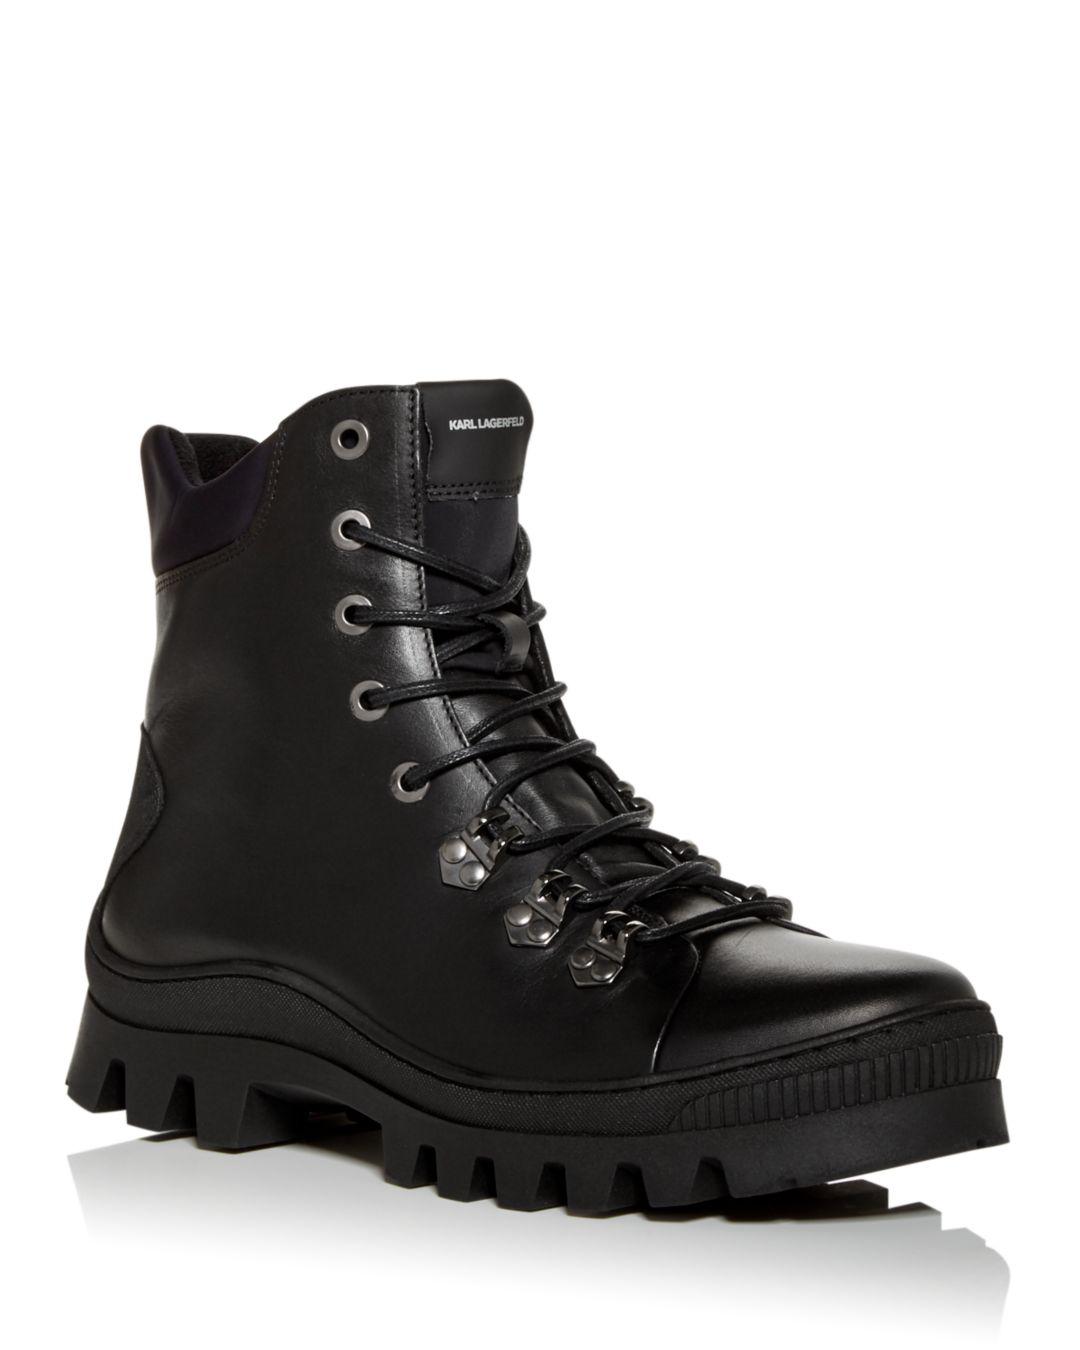 Karl Lagerfeld Leather Men's Combat Boots in Black for Men - Lyst